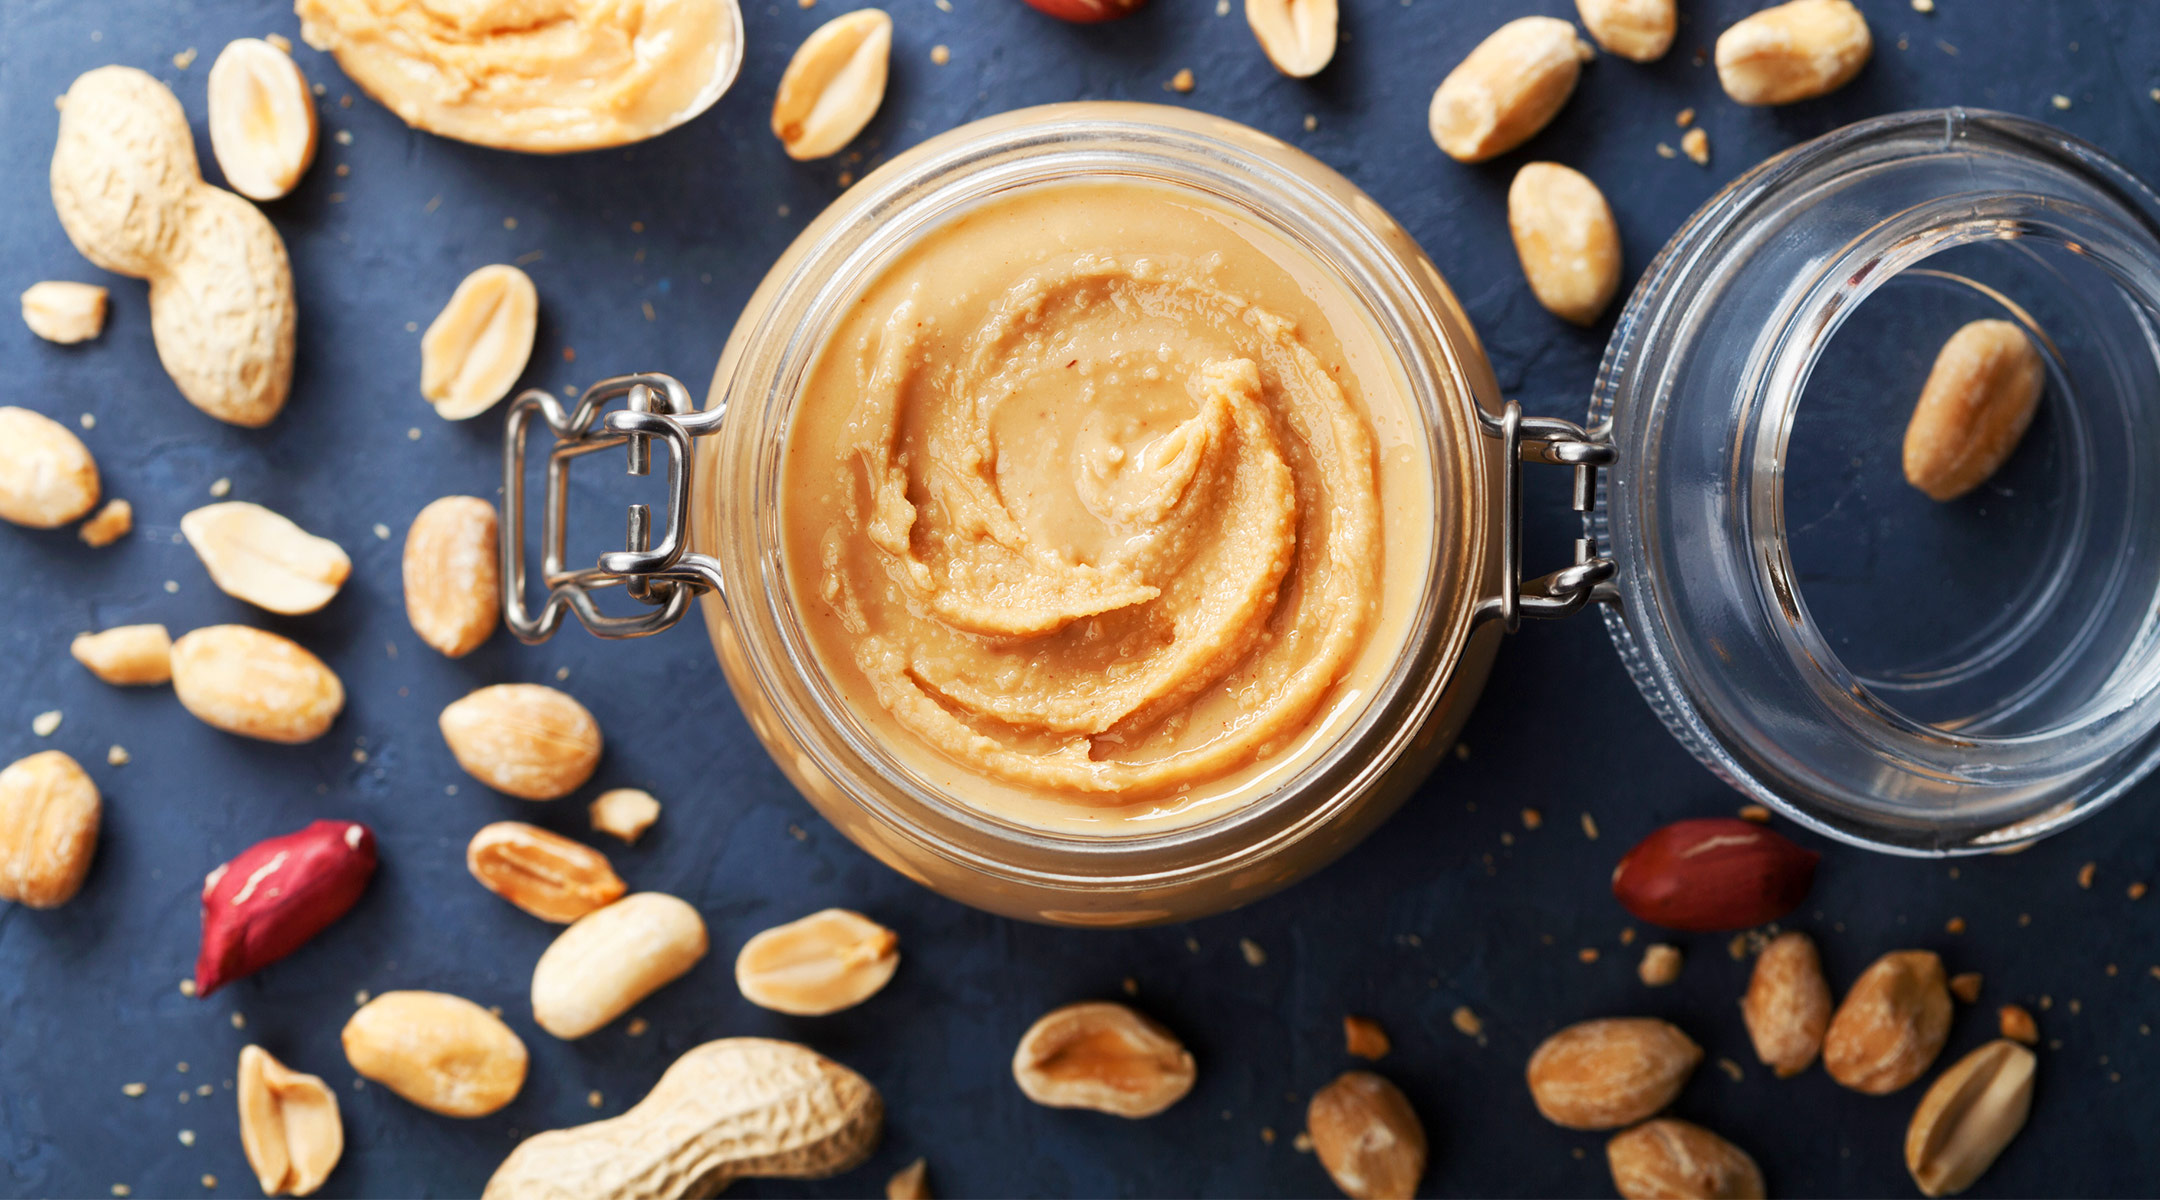 peanut butter in a jar surrounded by peanuts